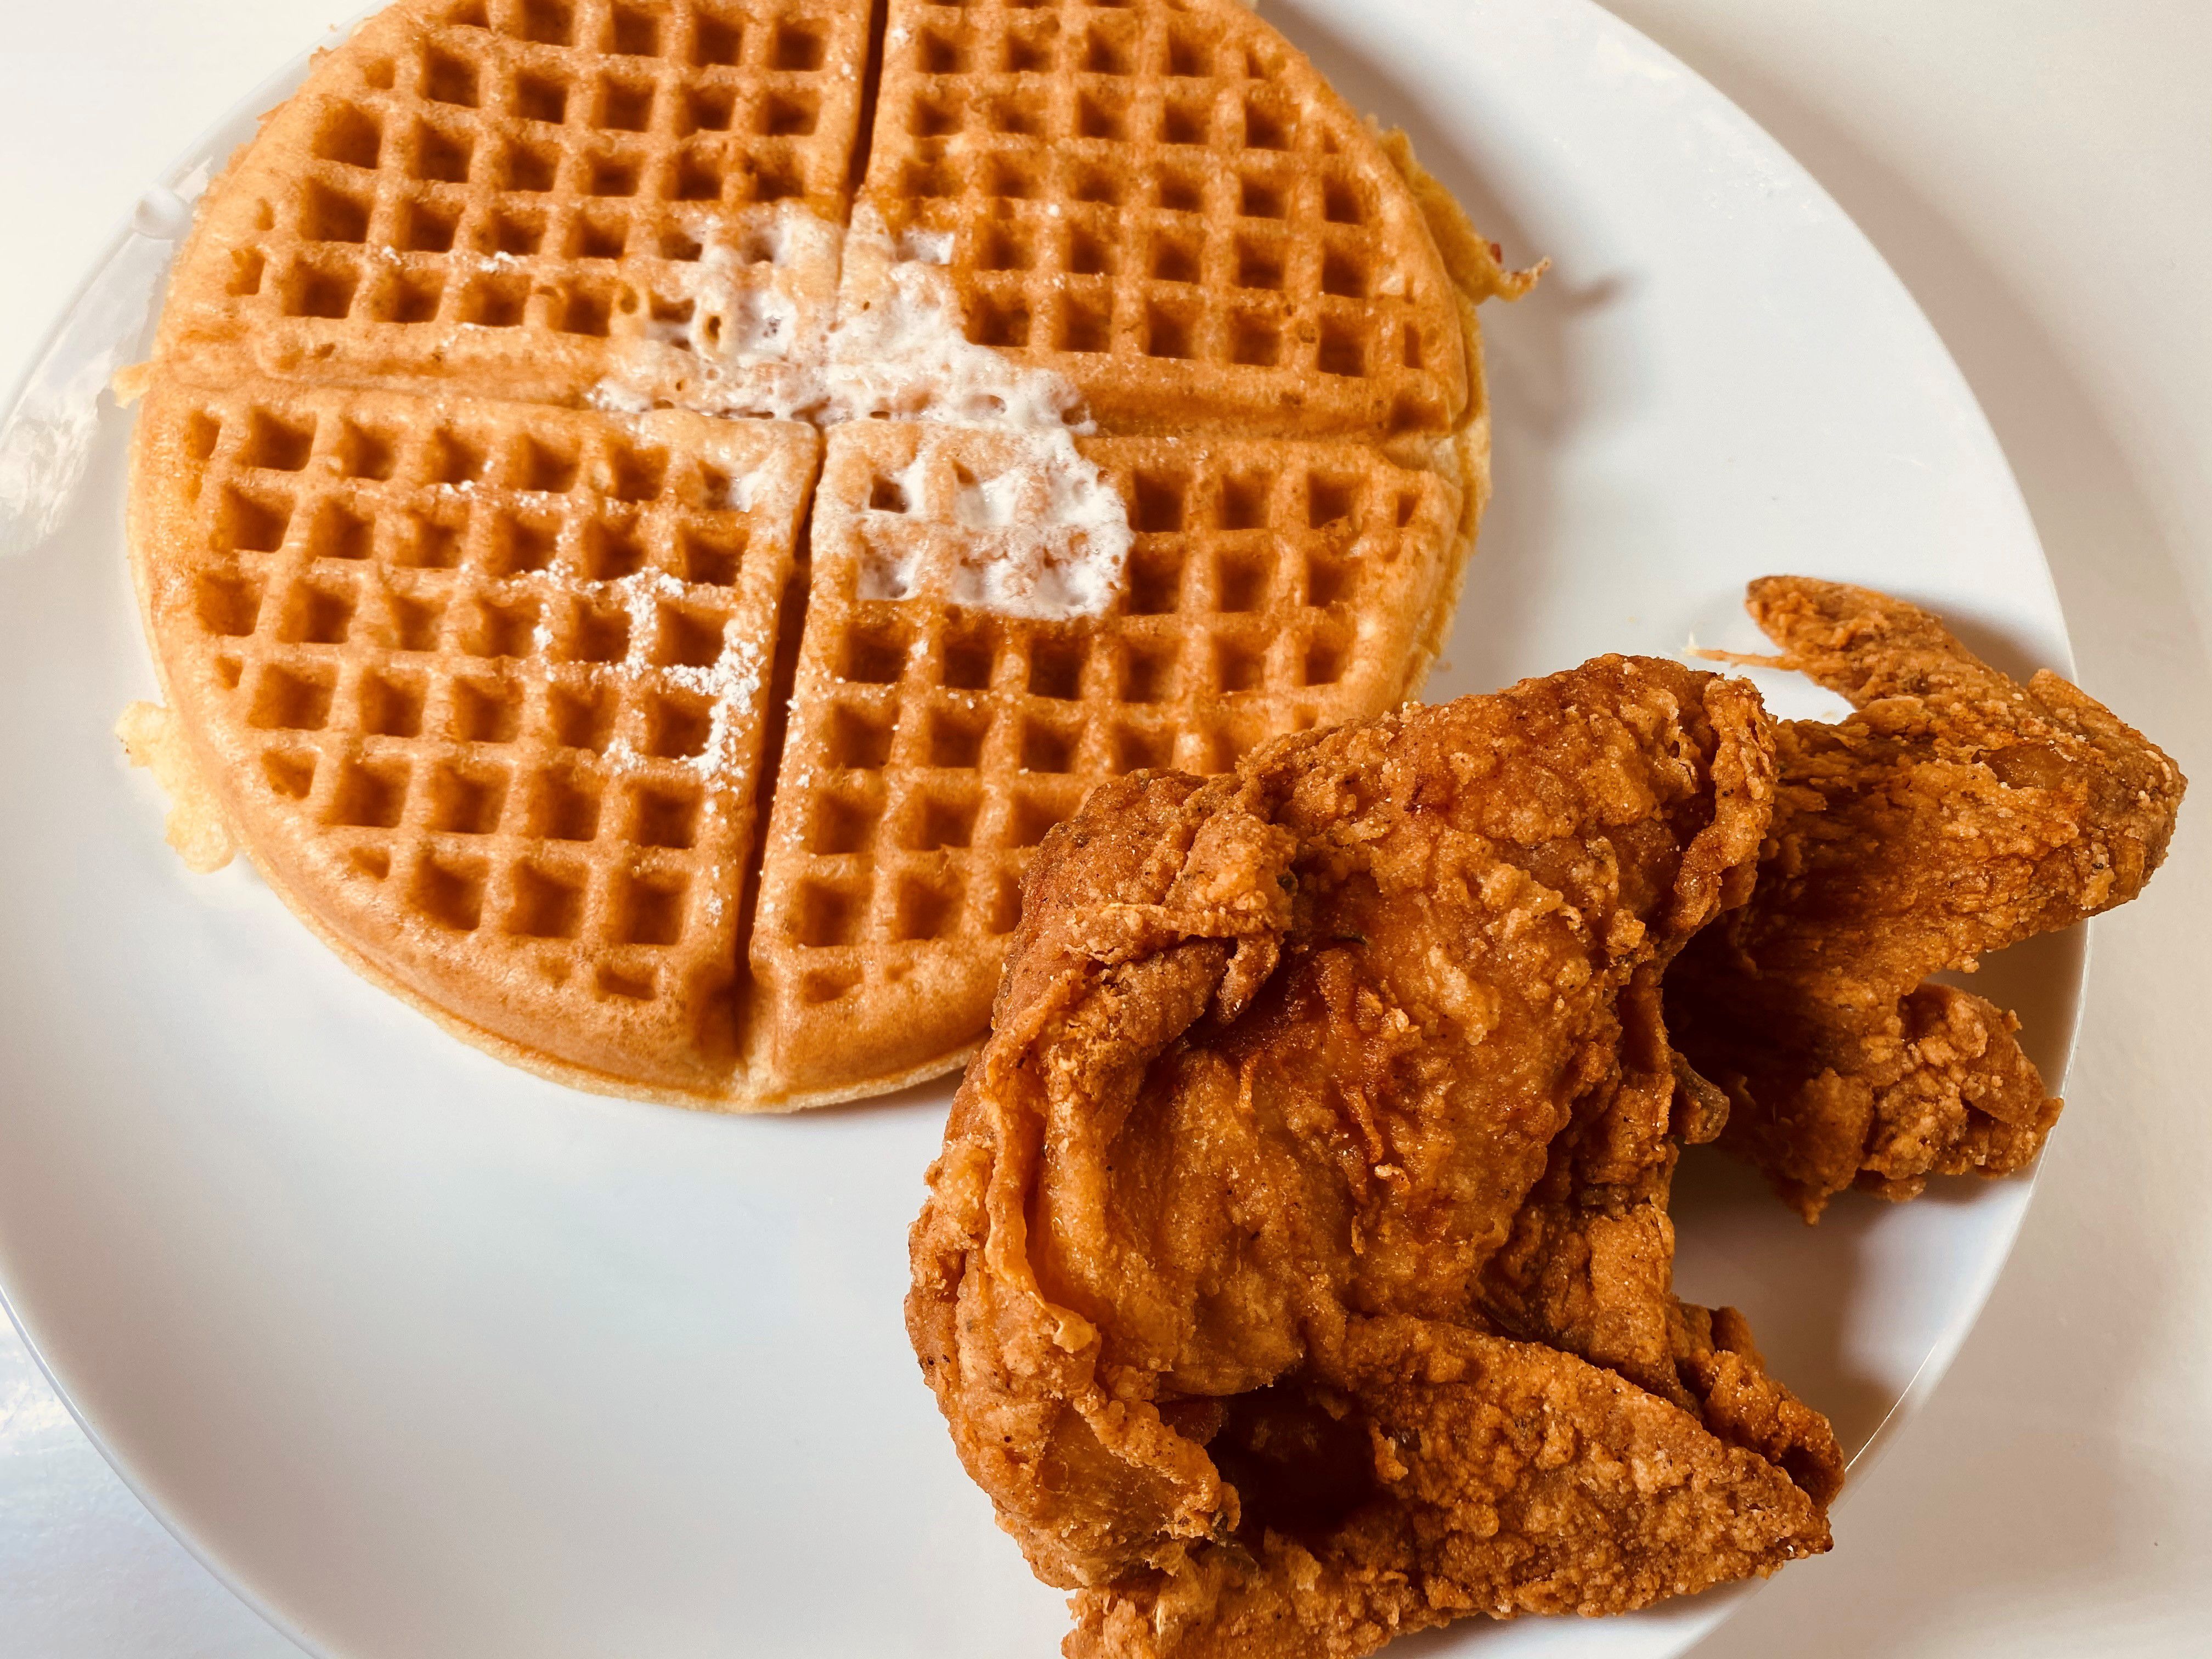 A yinzer take on chicken and waffles and more new eats at PNC Park